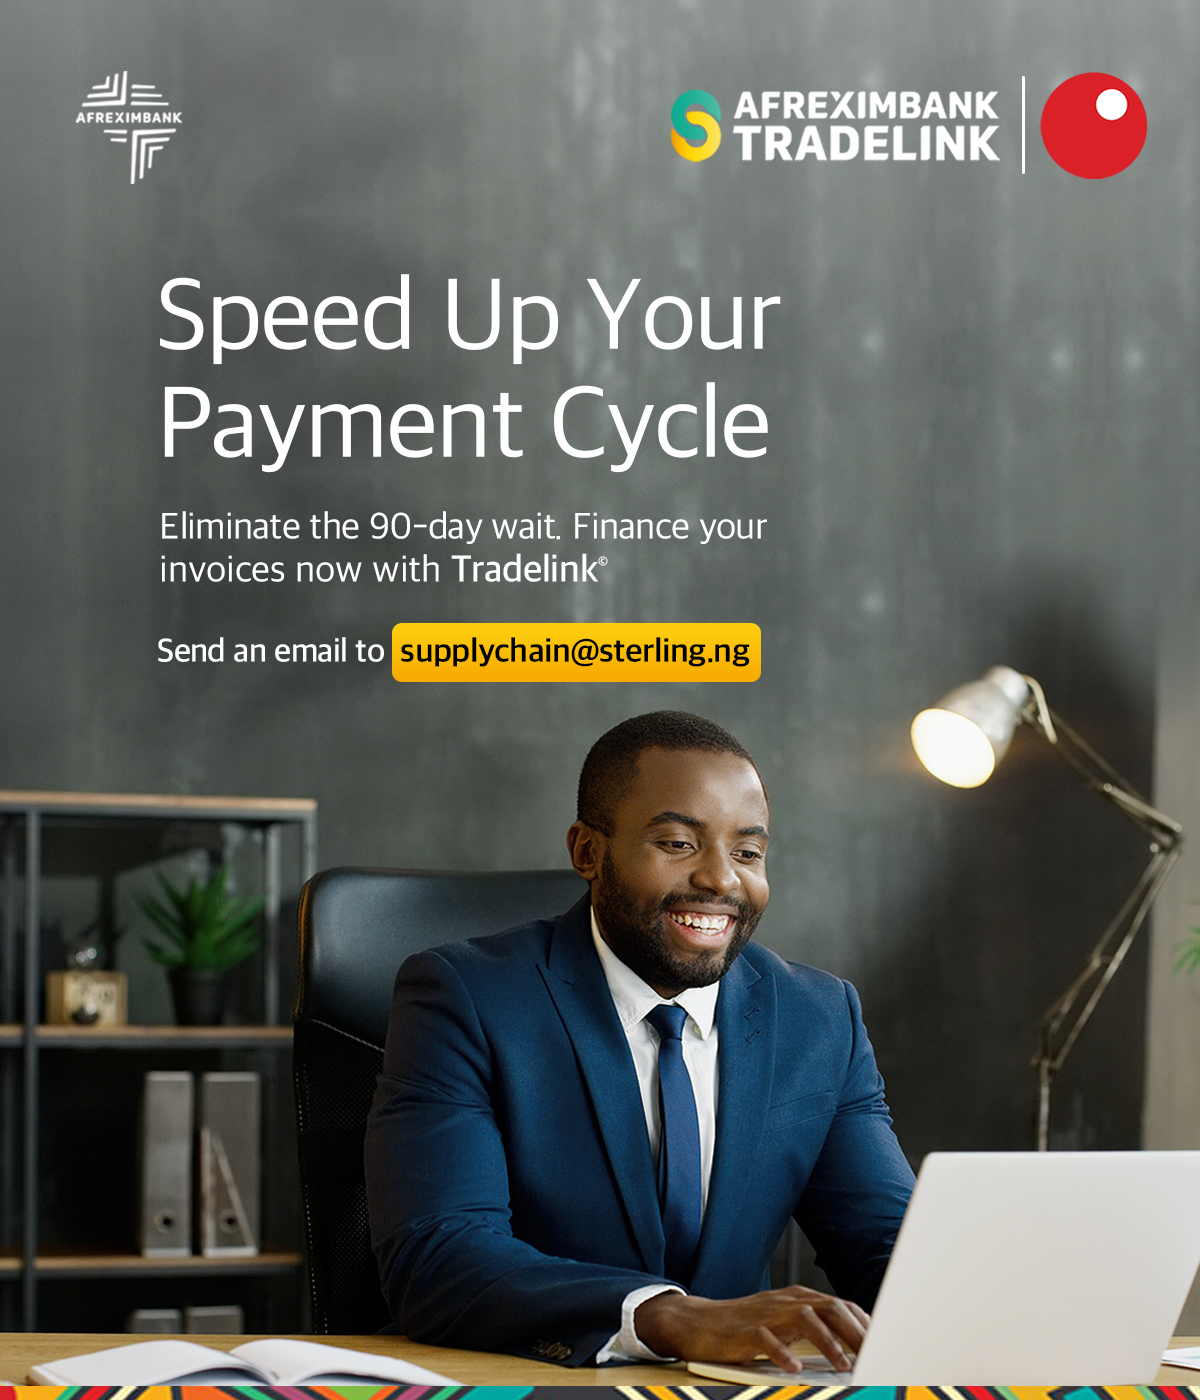 Businessman smiling and working on a laptop at his desk with text promoting Afreximbank Tradelink. The text reads: 'Speed Up Your Payment Cycle. Eliminate the 90-day wait. Finance your invoices now with Tradelink. Send an email to supplychain@sterling.ng.